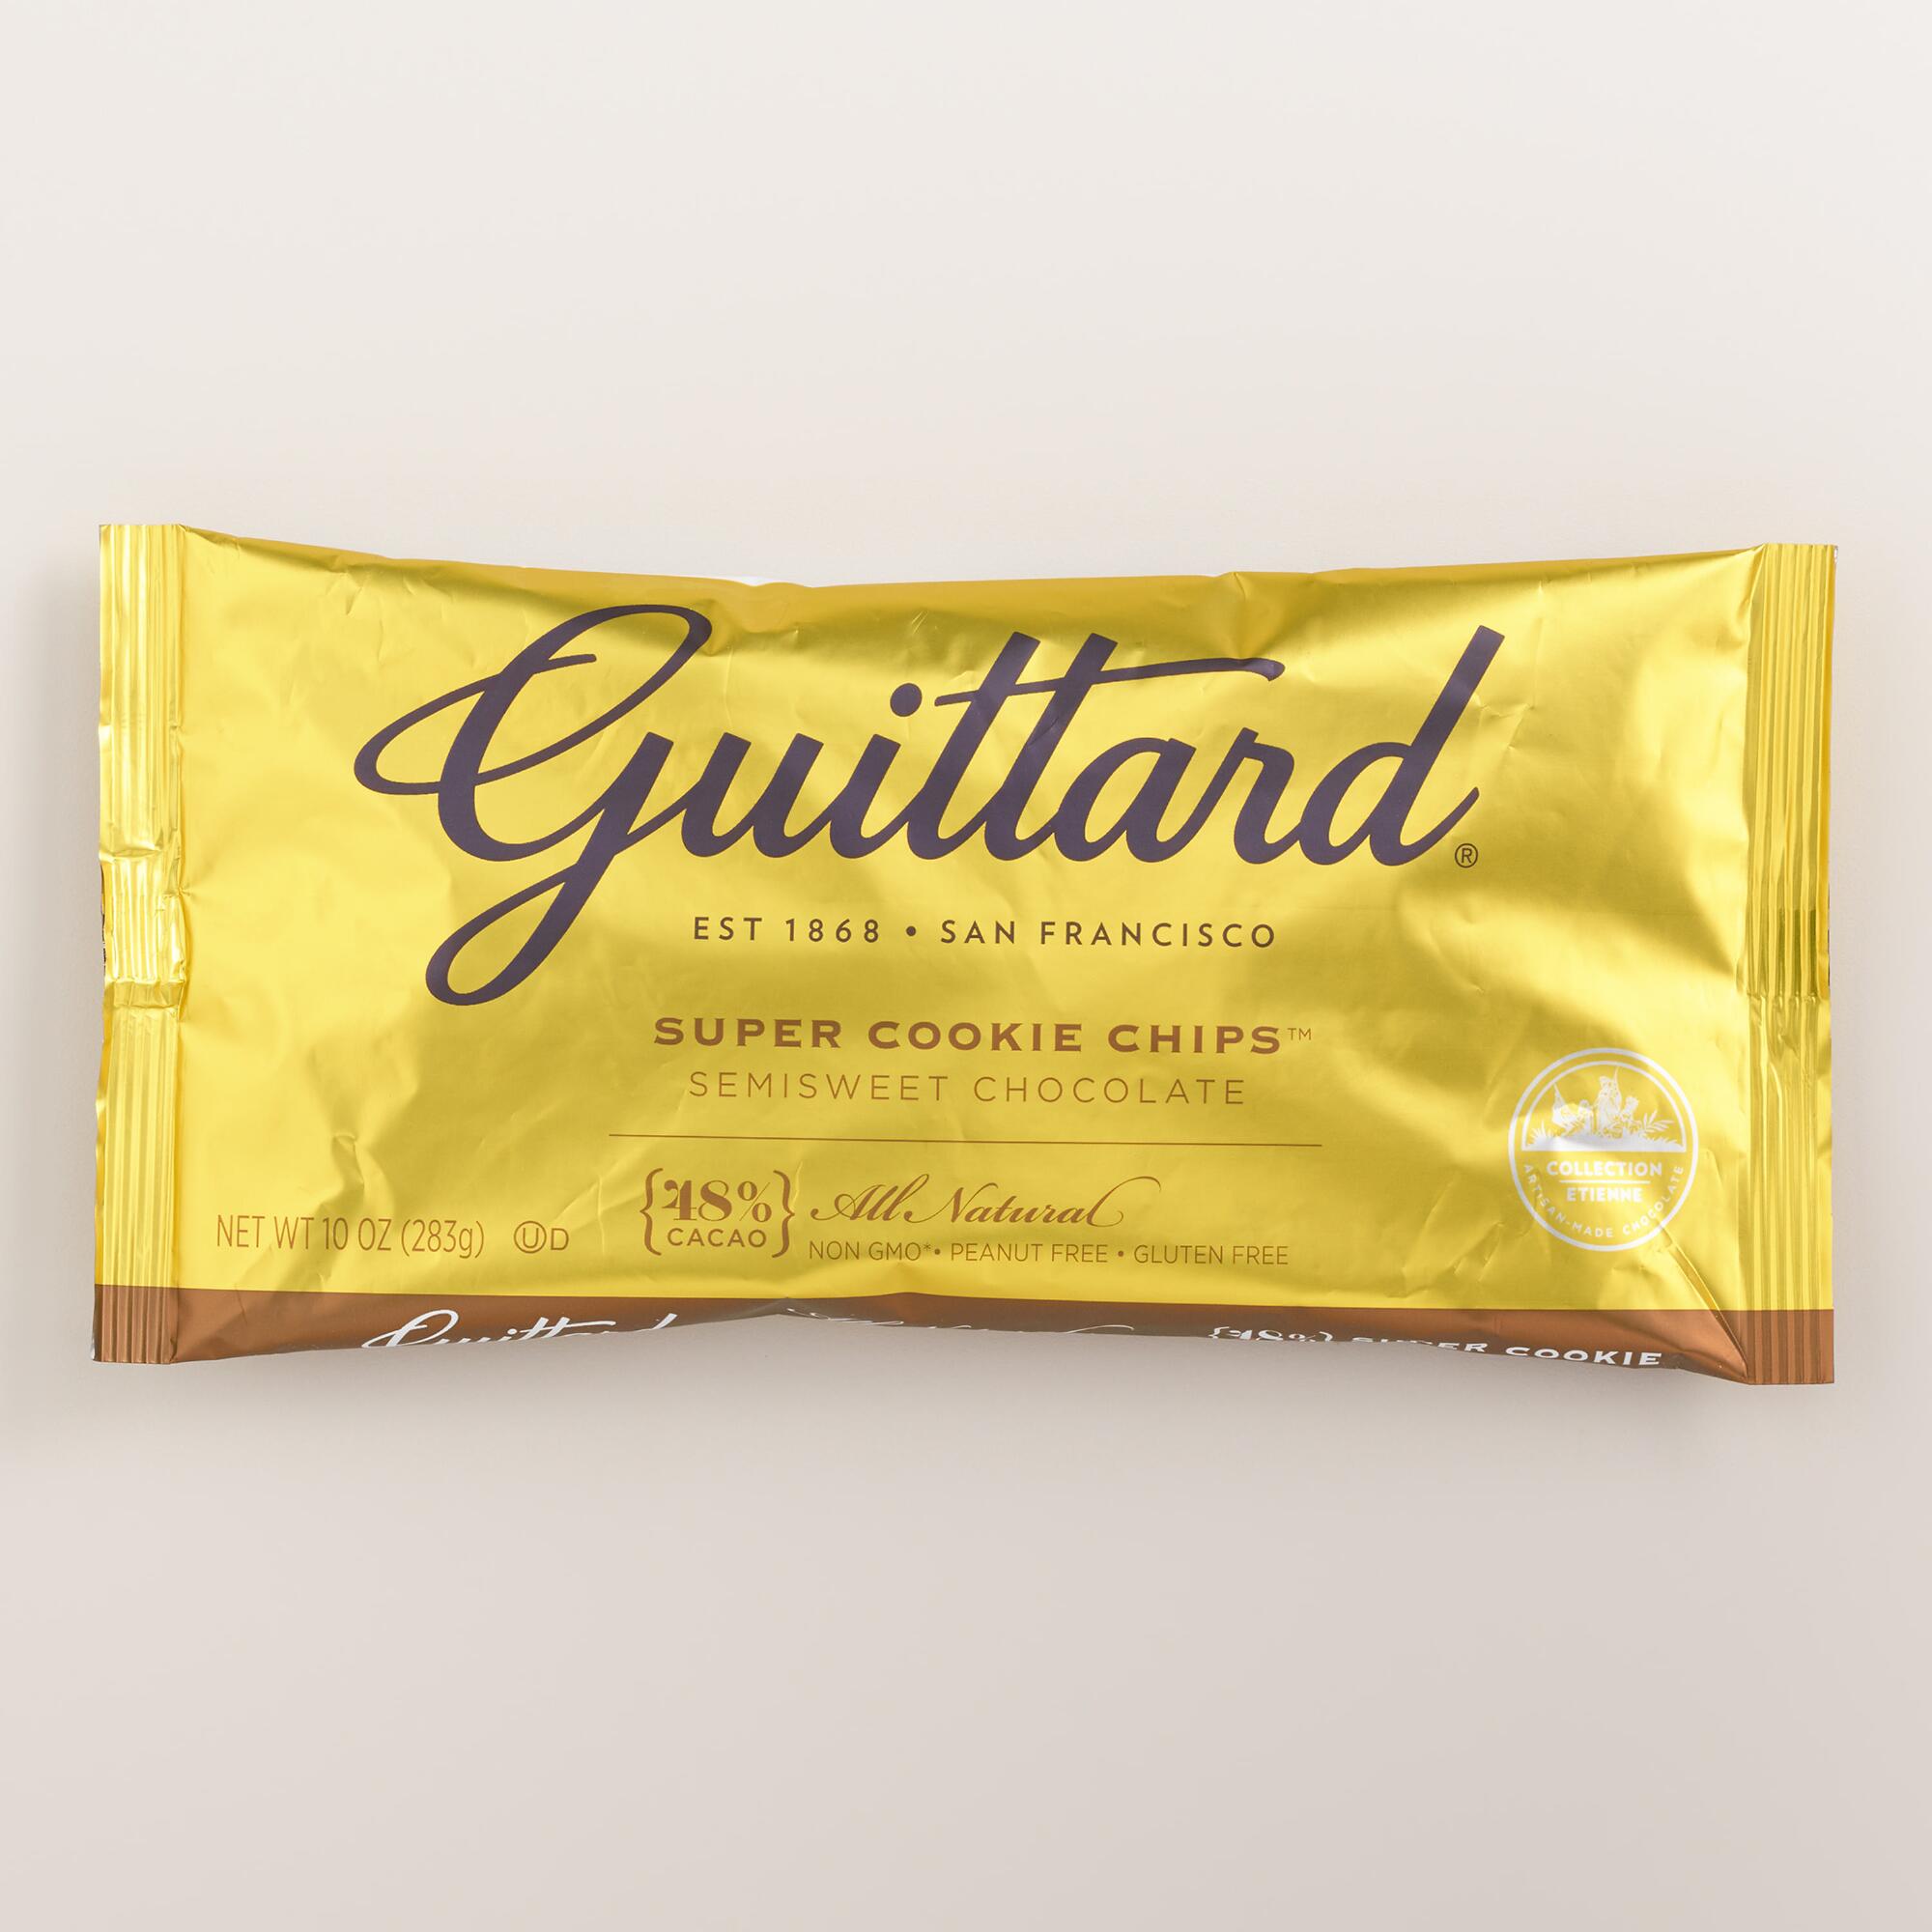 Guittard Semisweet Chocolate Super Cookie Chips by World Market